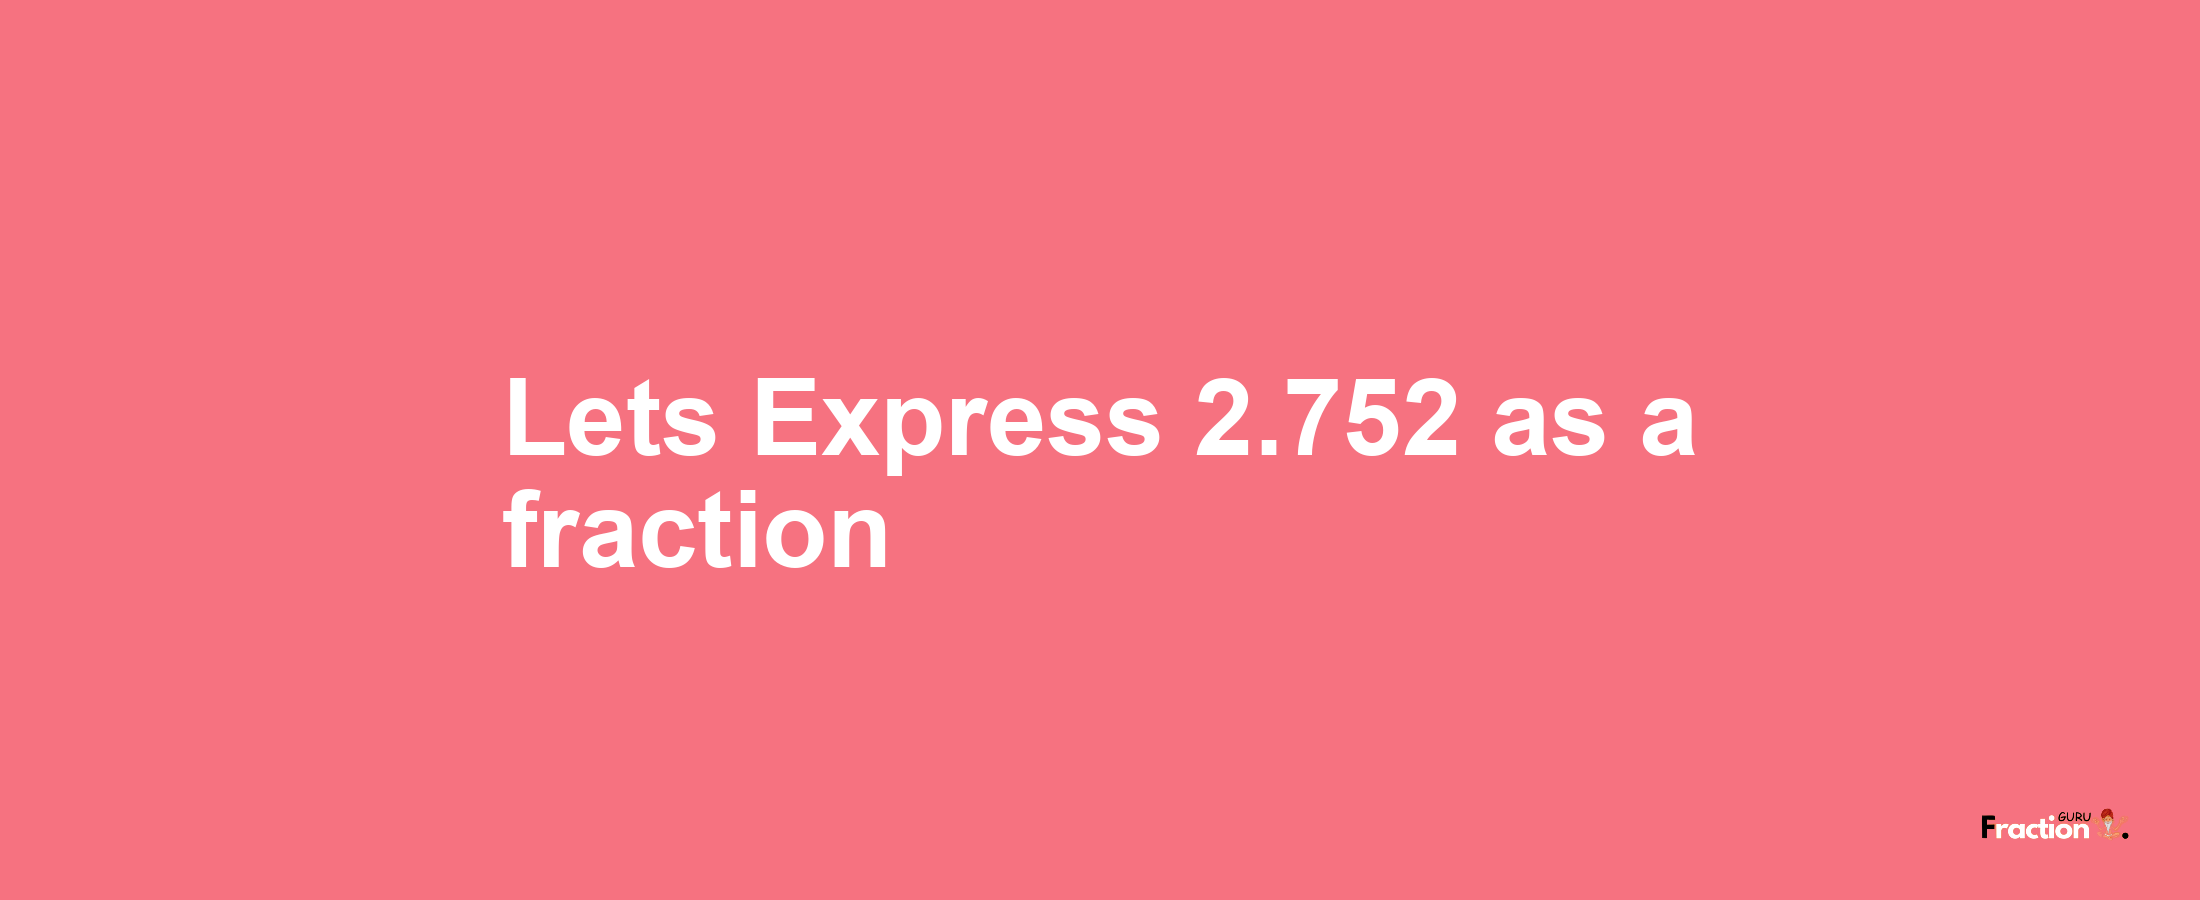 Lets Express 2.752 as afraction